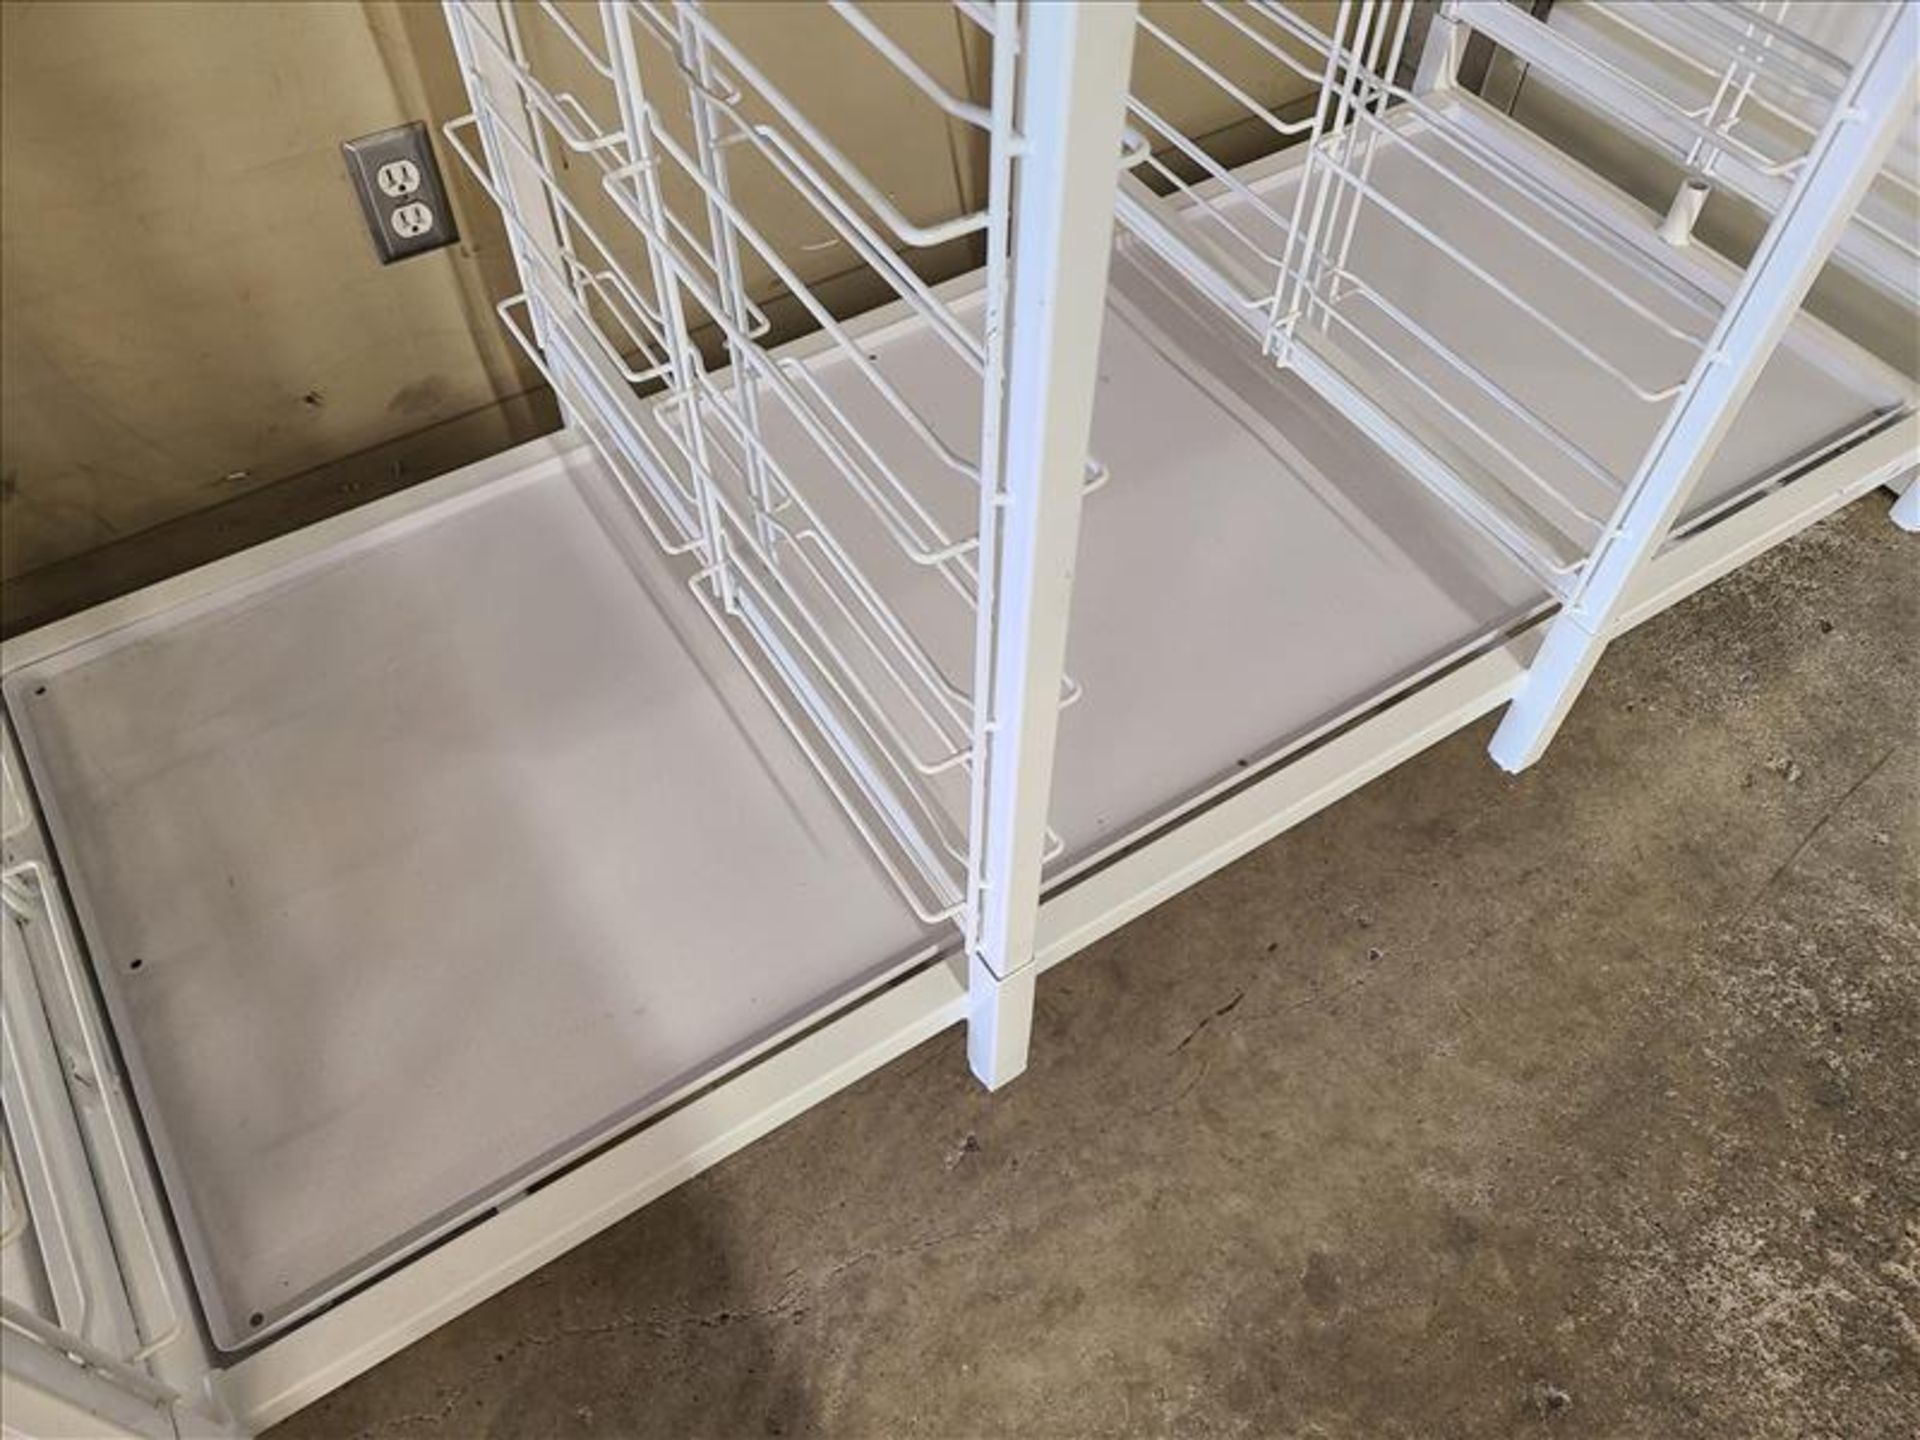 (2) VRE integrated plant production/tray drying racks, mod. DRYMAX30, 25.5 in. x 62 in. x 72 in. - Image 3 of 3